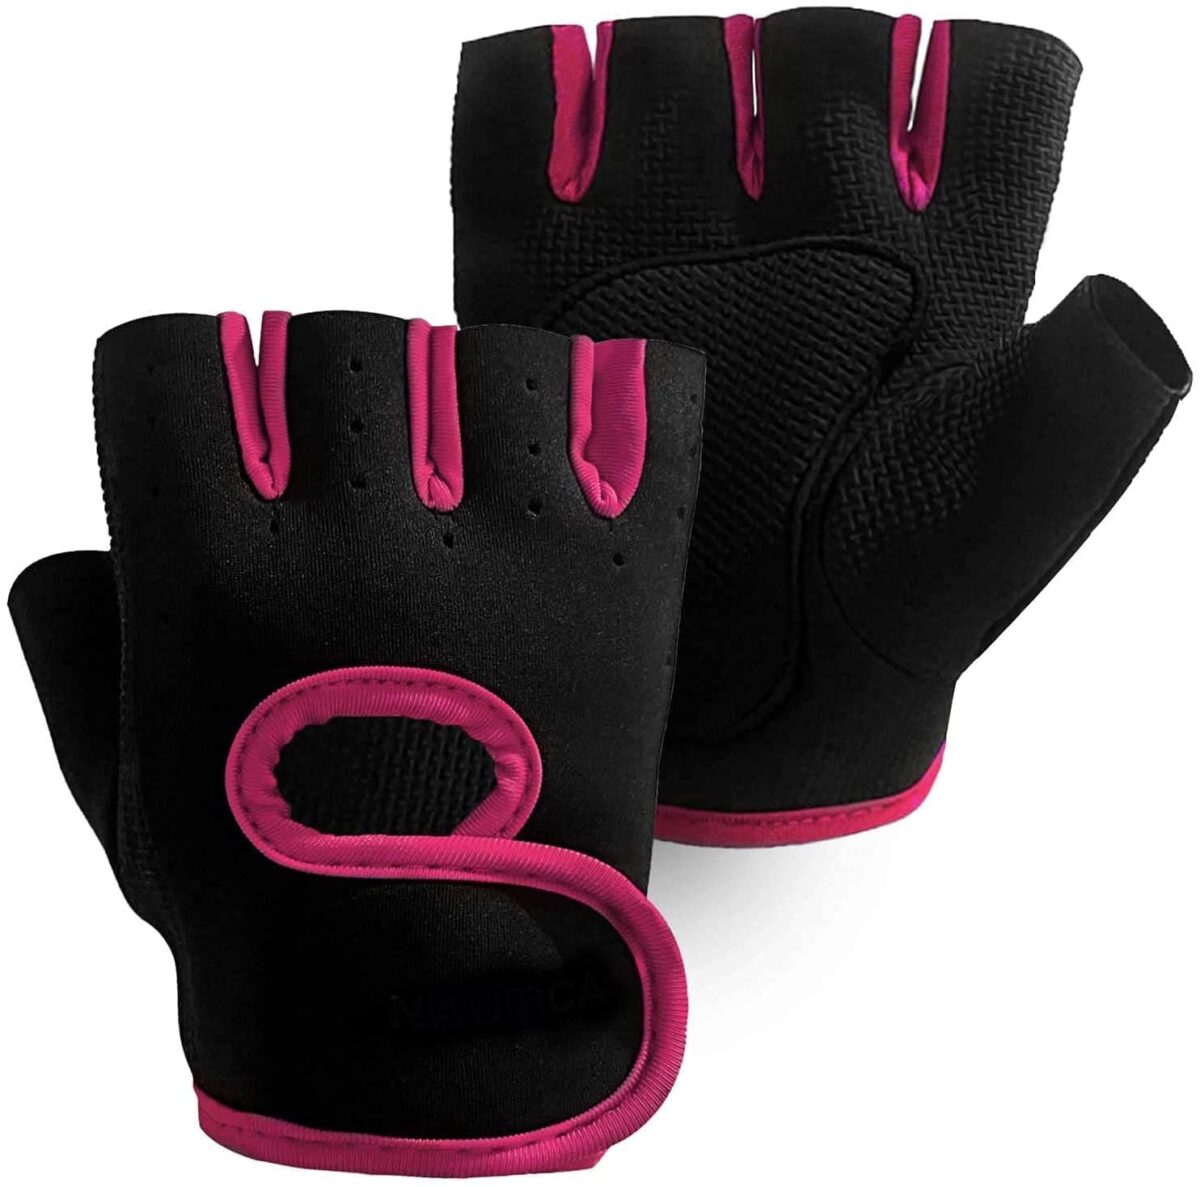 Weightlifting Gym Gloves Colour Black/Pink 1